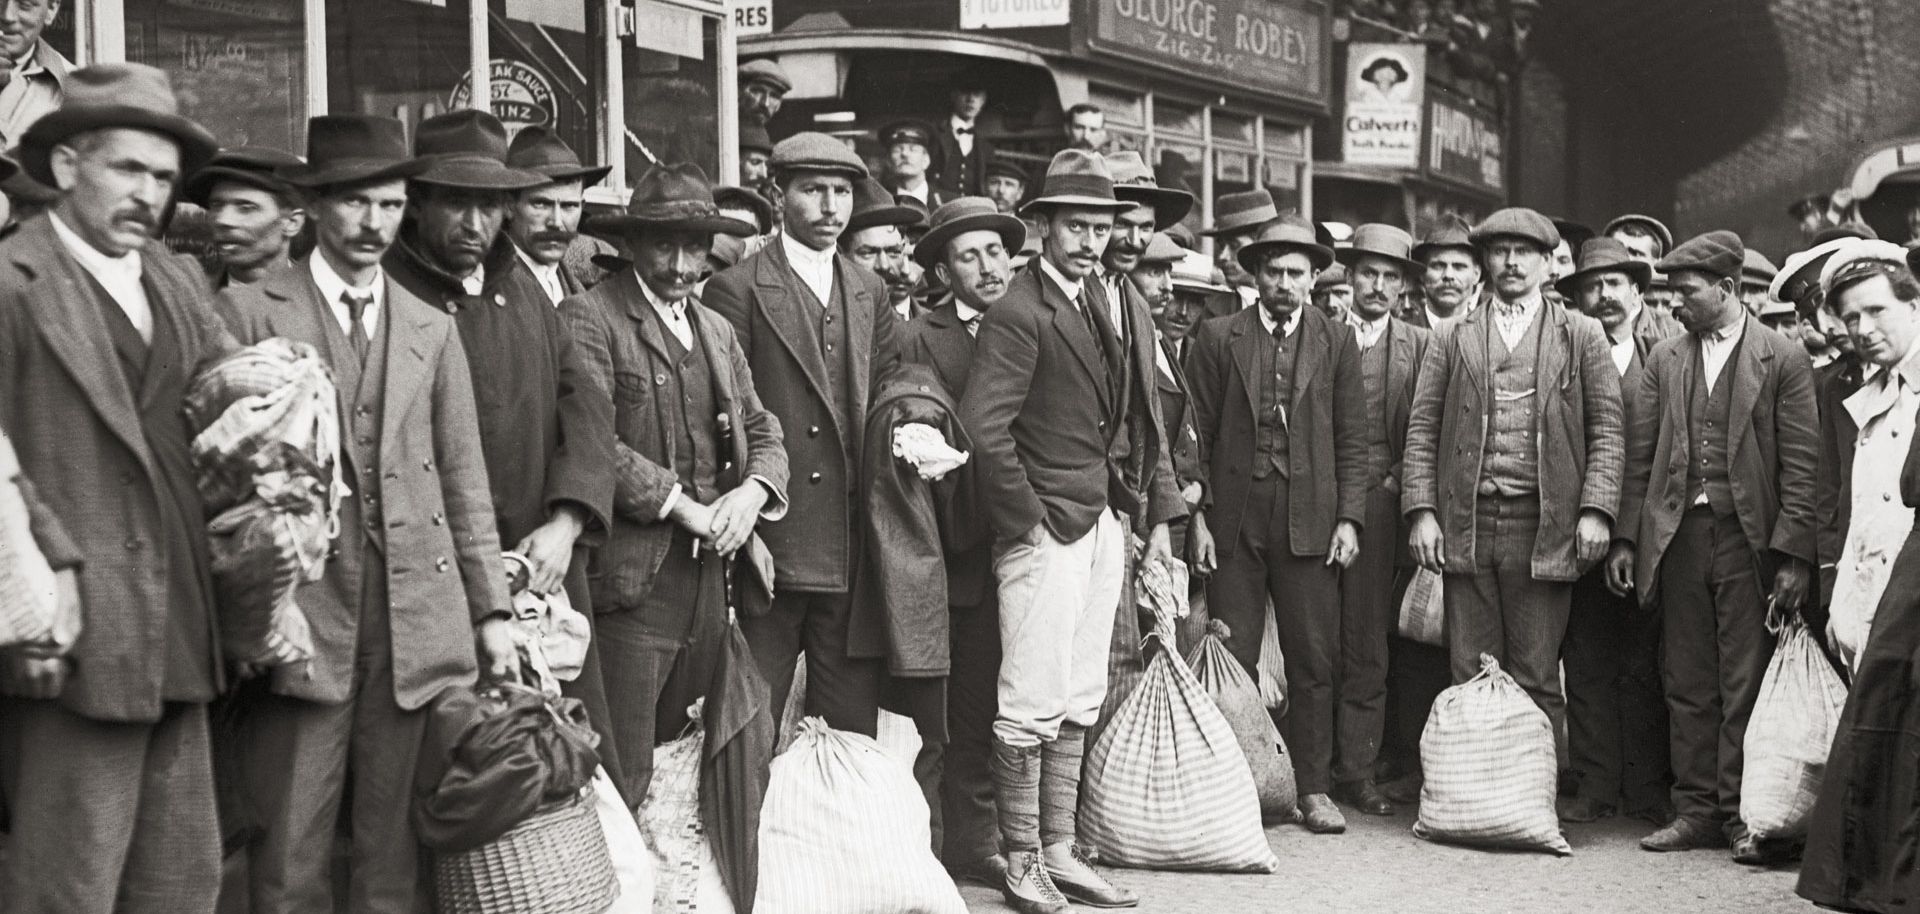 Portuguese workmen set off to France from London to look for employment in June 1917. European history is replete with migrant flows, some of which offer lessons in what to expect from the current refugee crisis.